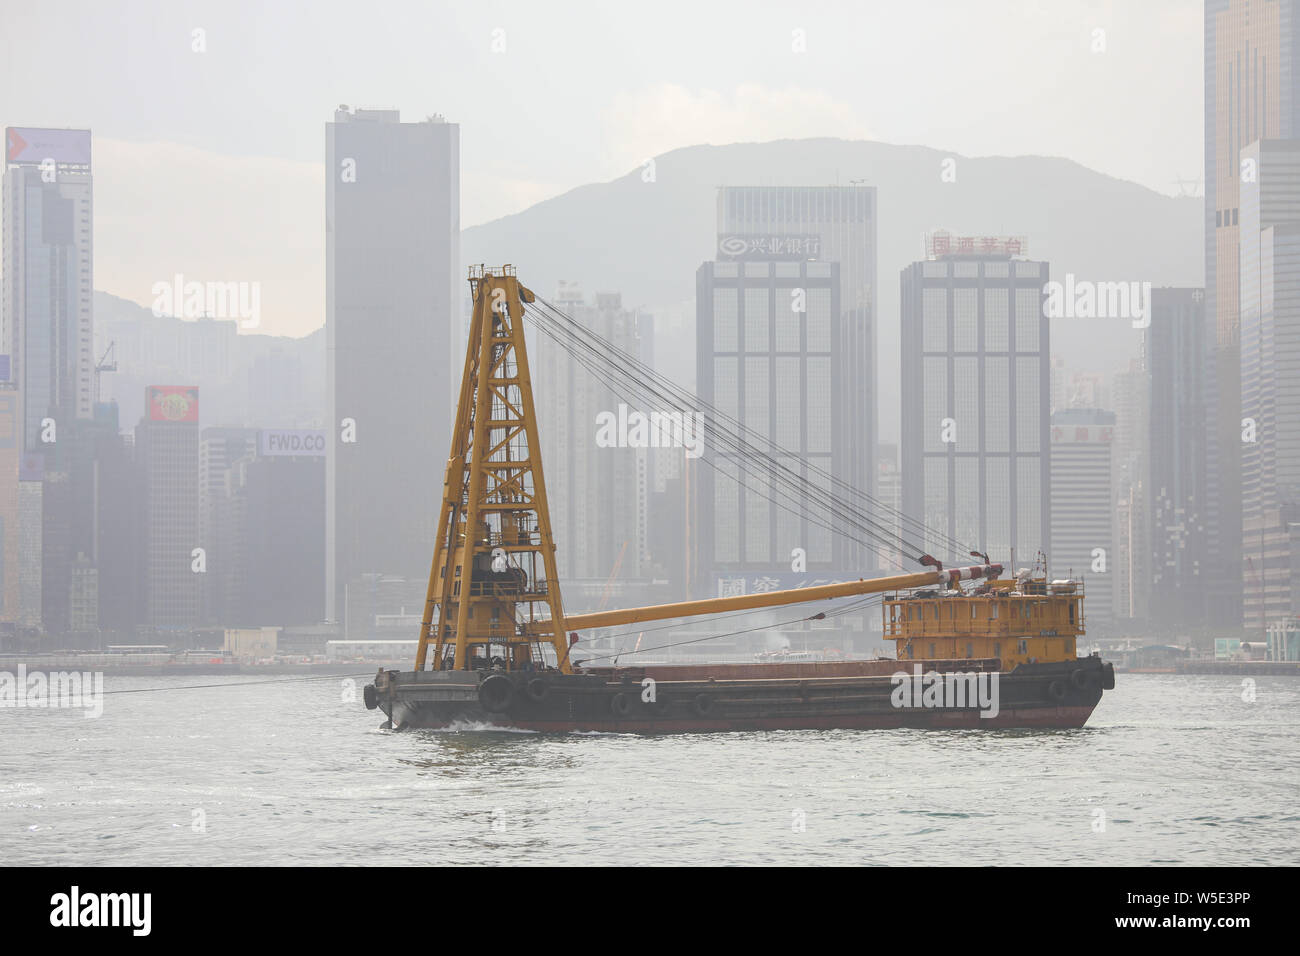 Container barge with derrick crane on Victoria Harbor, Hong Kong Island on backround Stock Photo